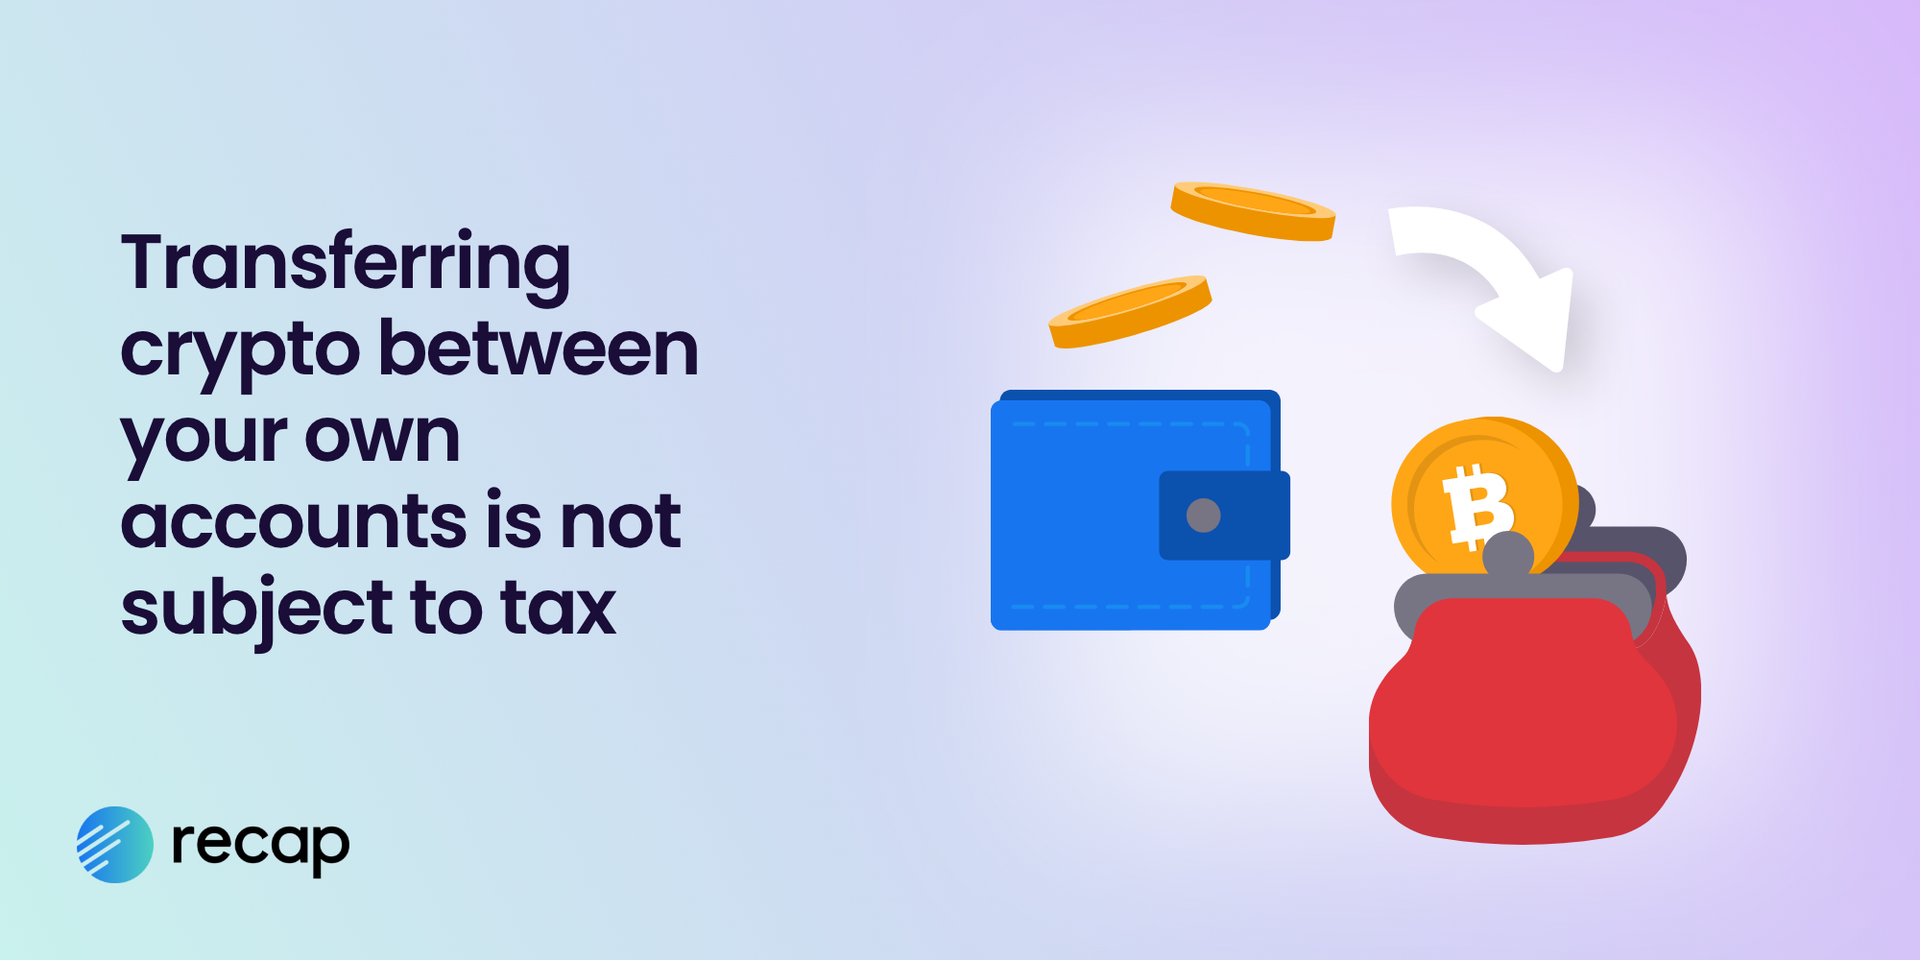 Illustration stating that transferring crypto between your own accounts is not subject to tax